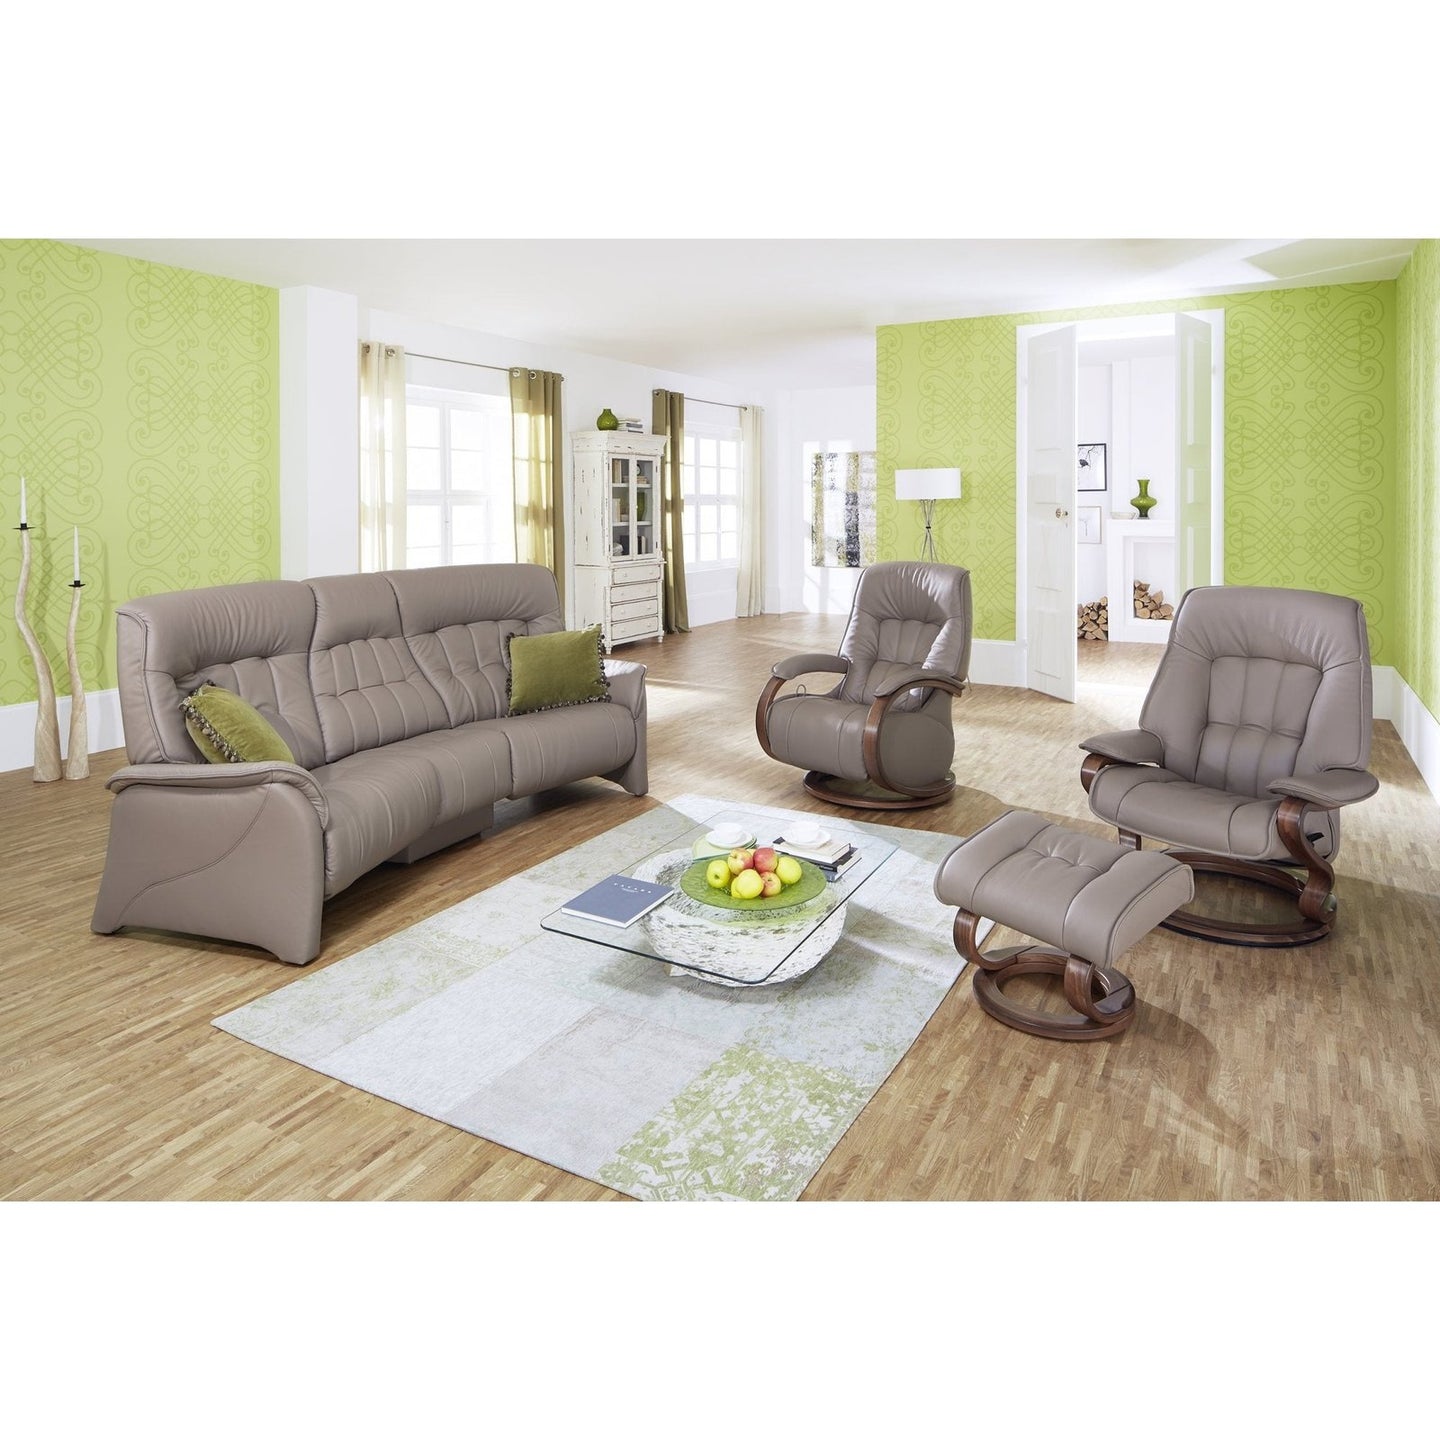 Himolla Rhine Curved Power Recliner Sofa with Table - Hunter Furnishing